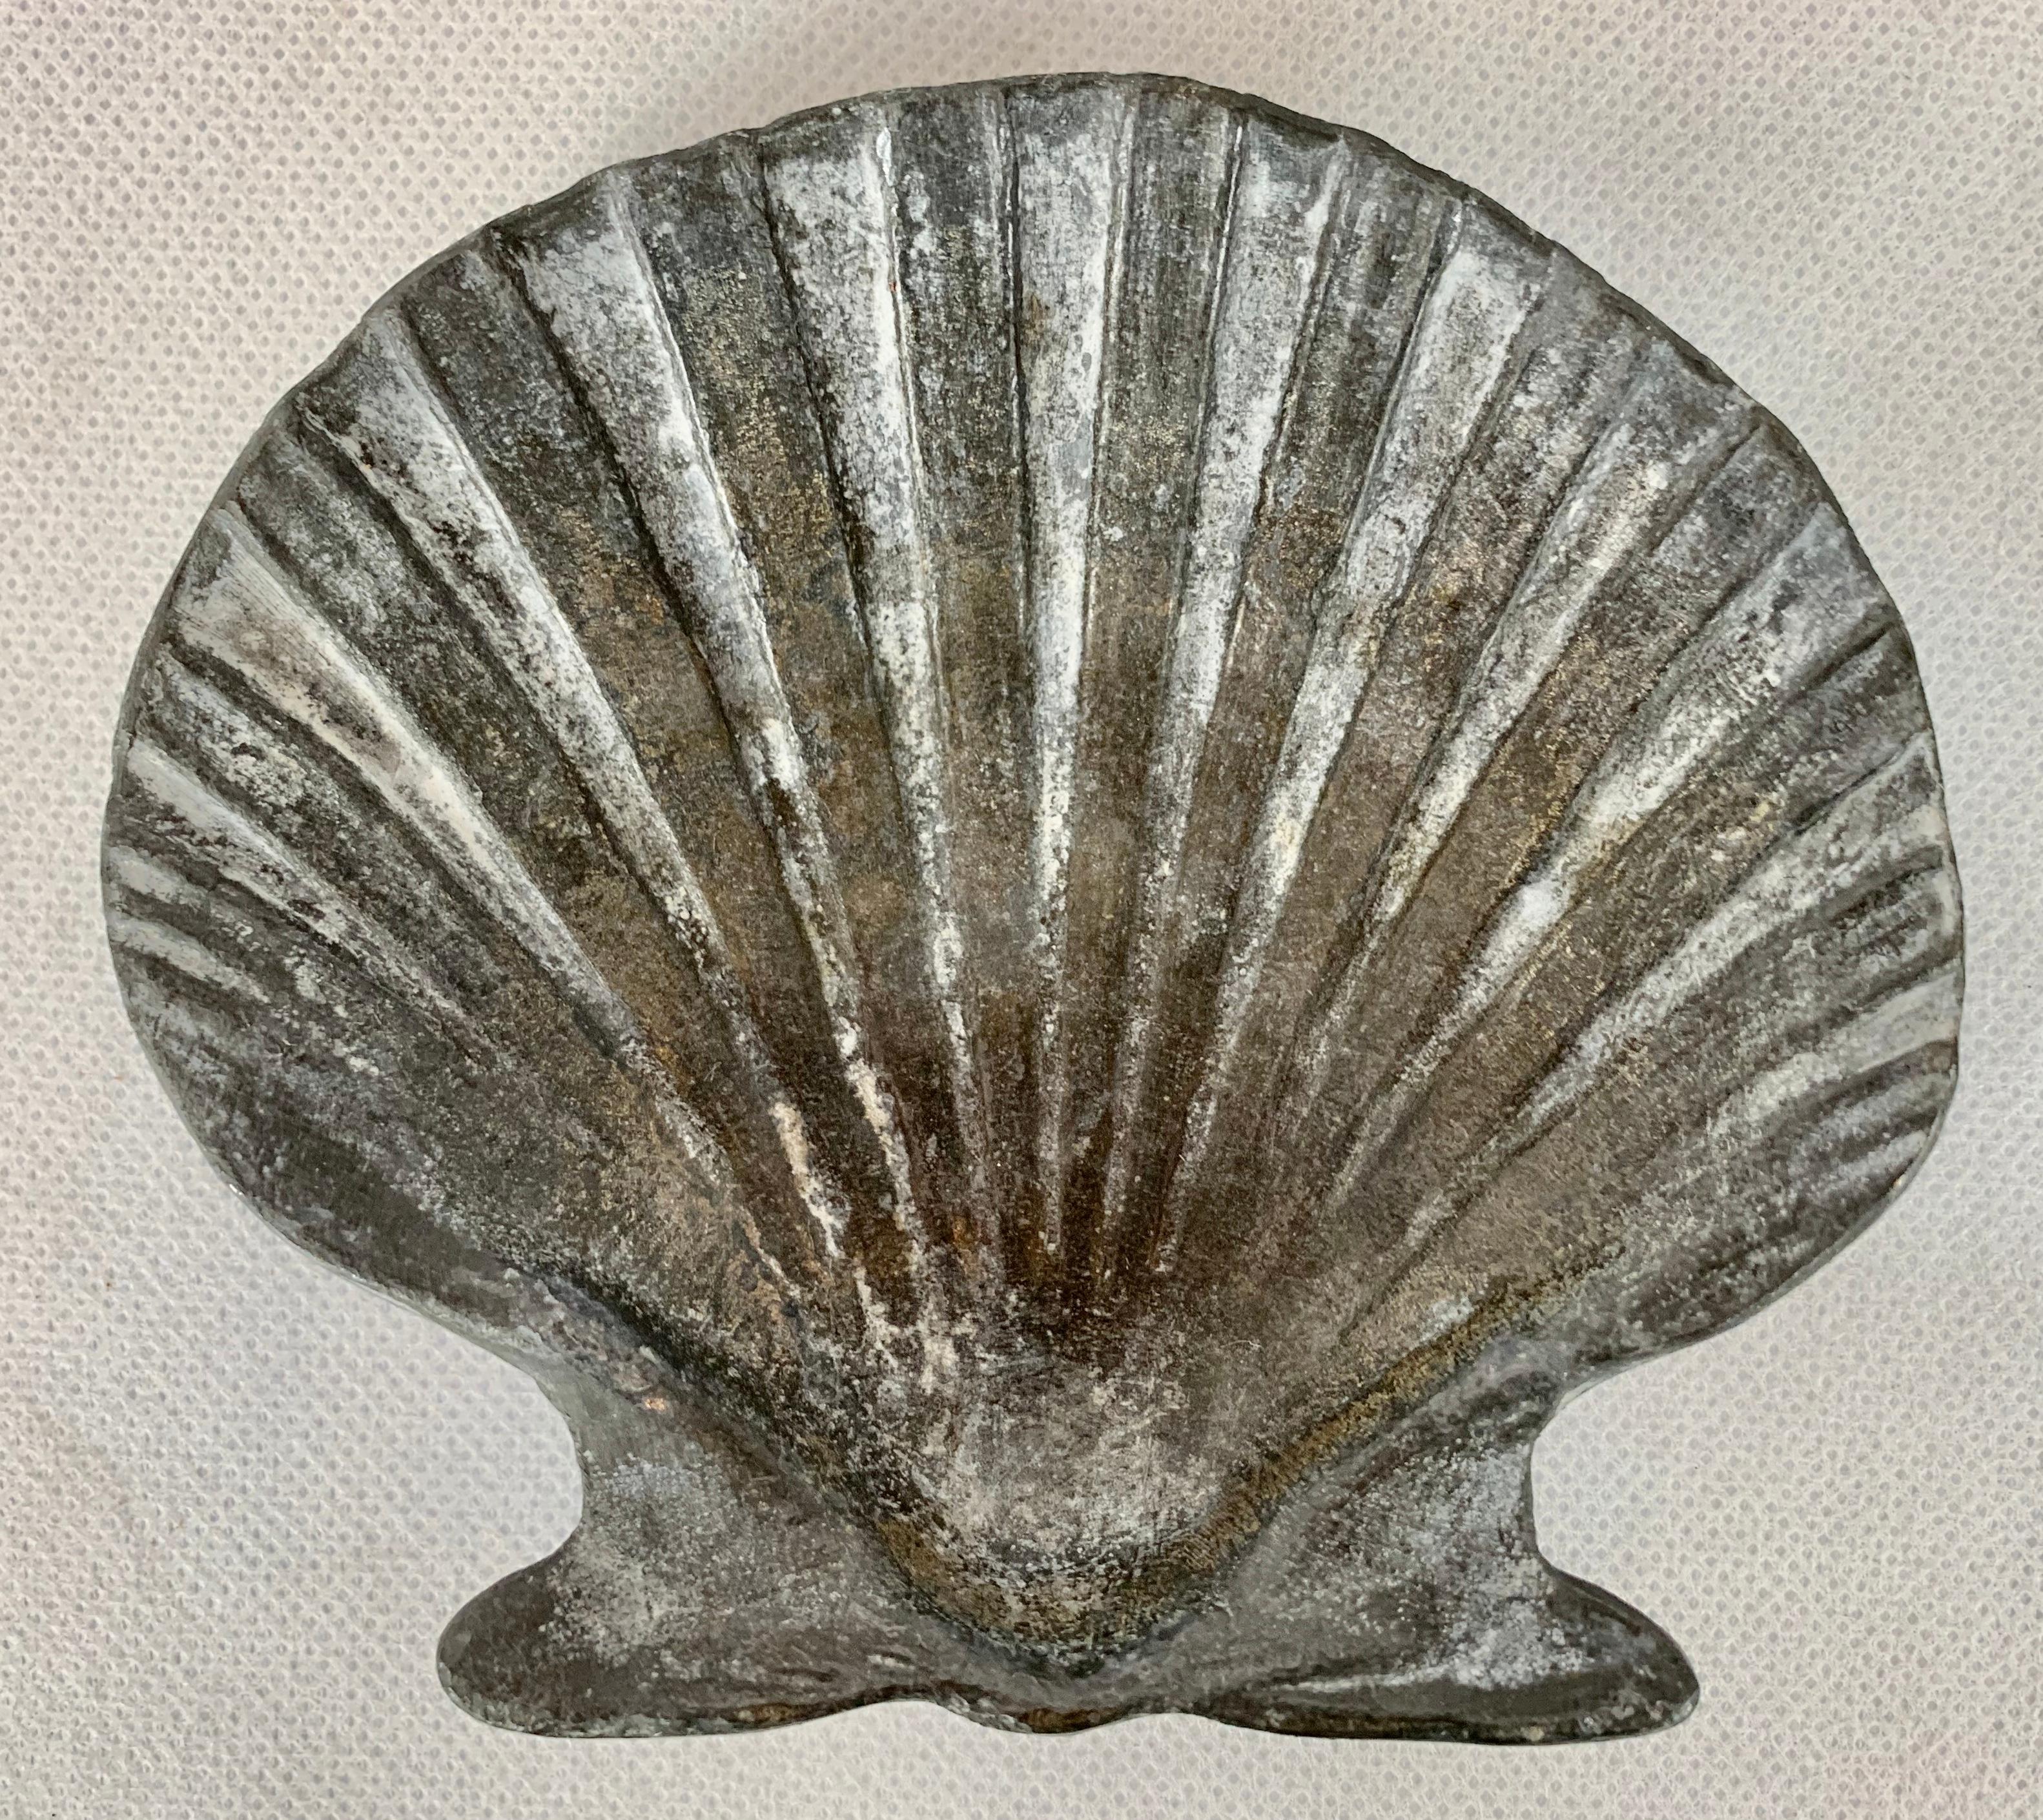 Garden items made from lead were ideal as they do well in most climates and achieve a favorable patina. This set of four are scallop shells and well modeled. I imagine they could be built into a wall, corners of a floor or used strictly for